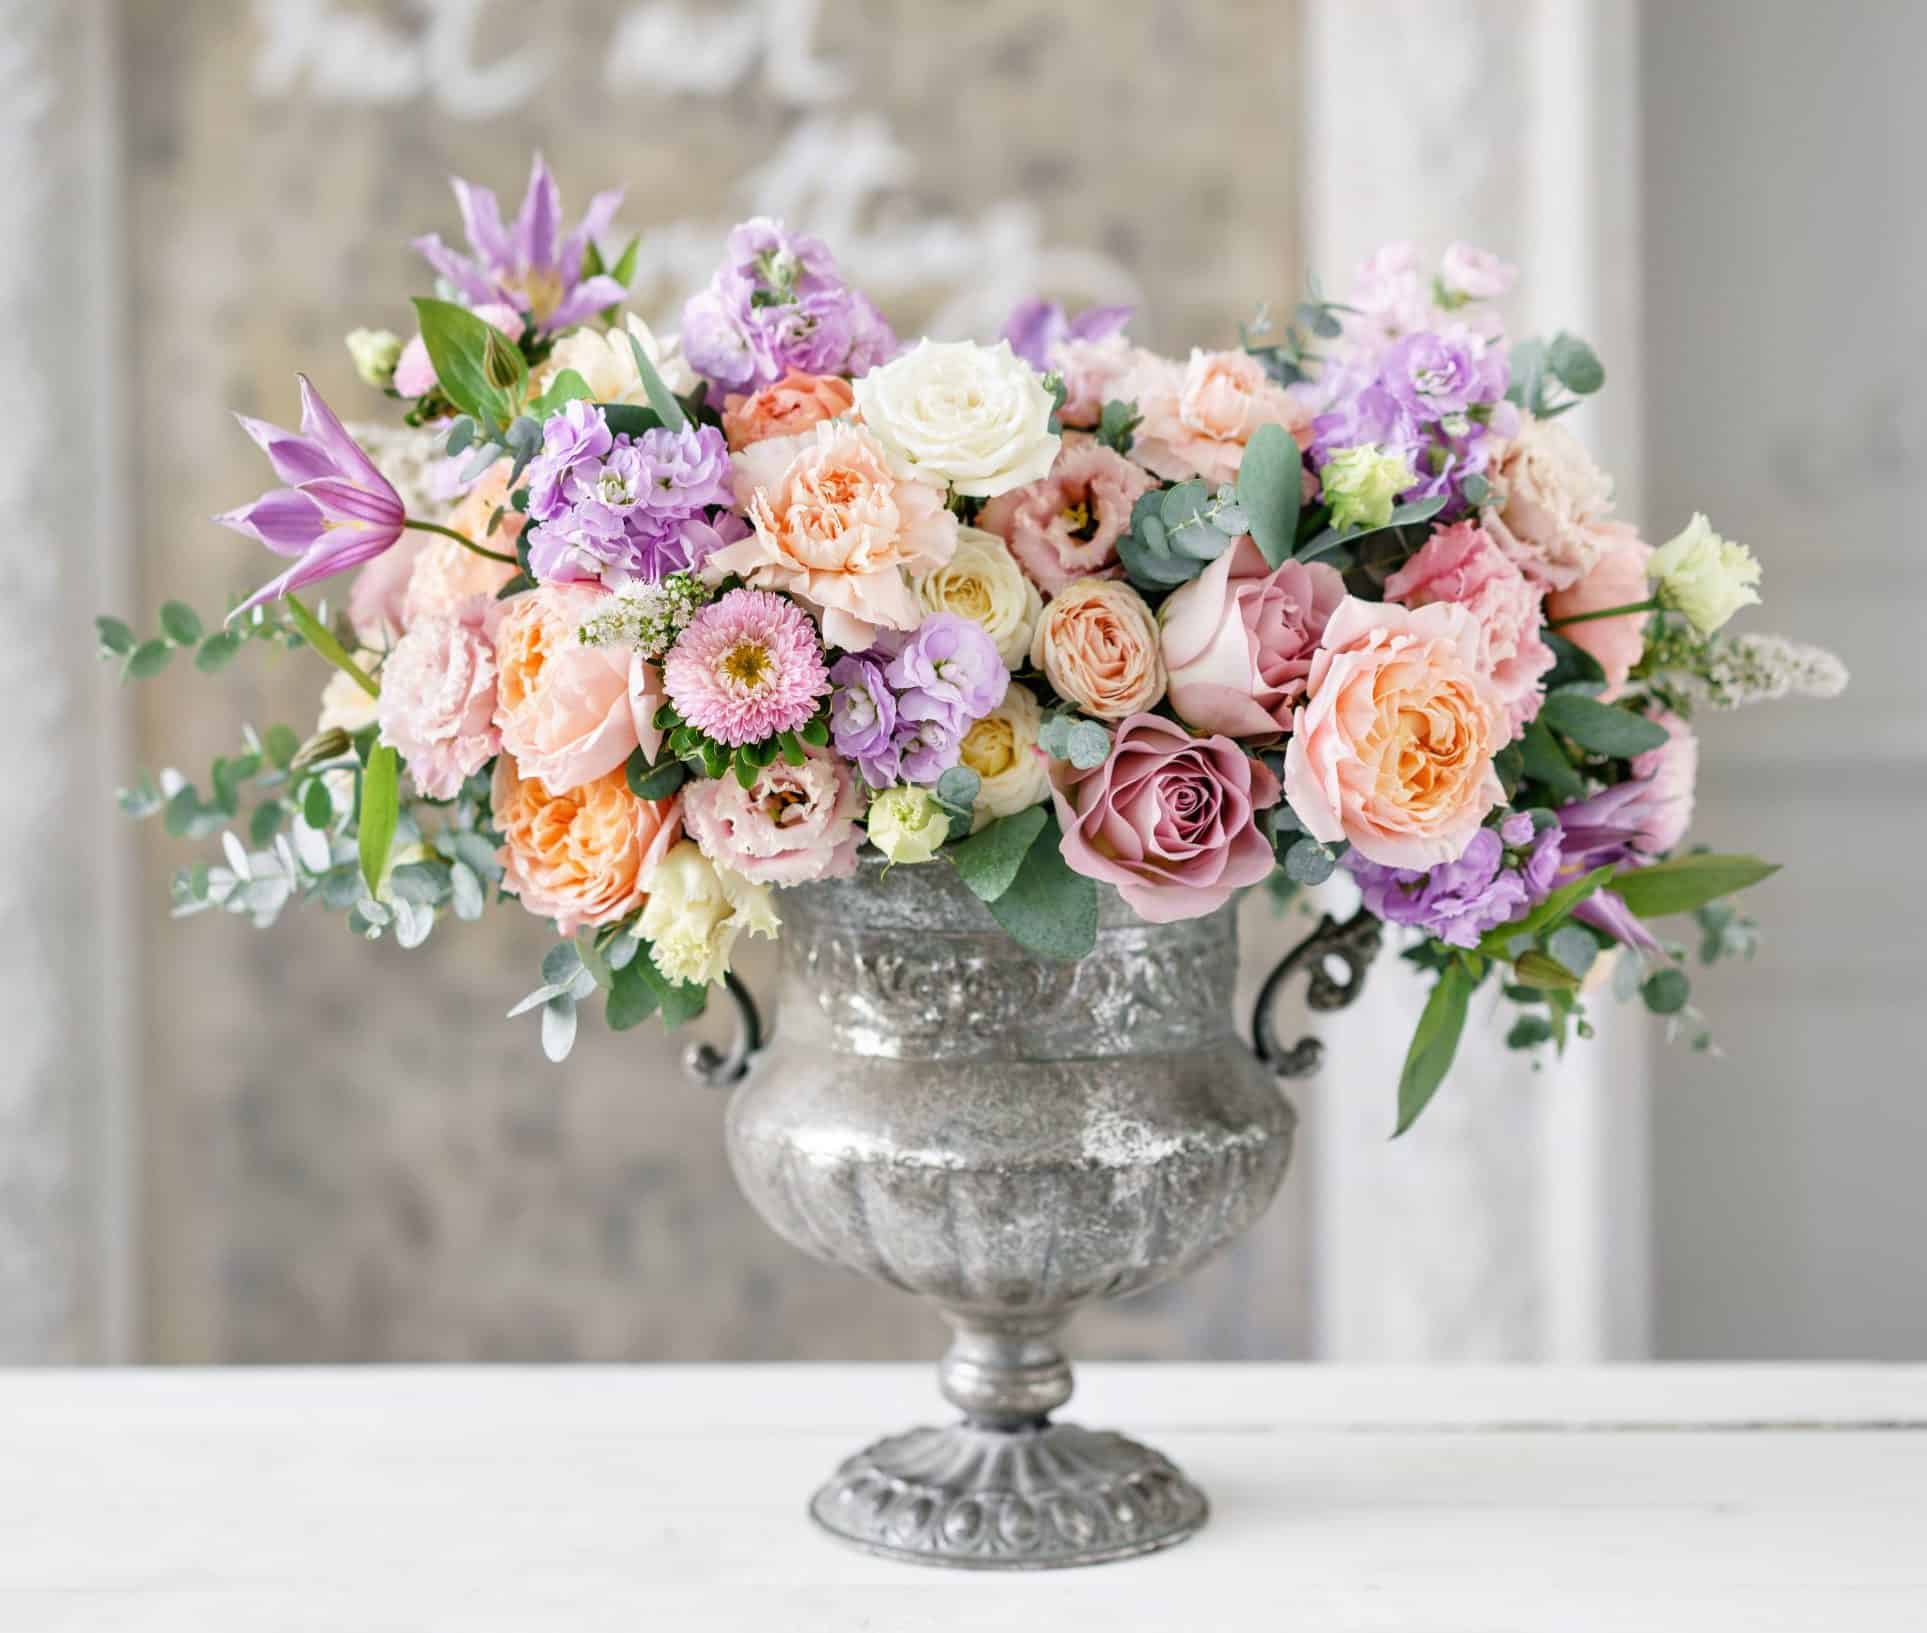 The 10 Fundamentals of Flower Arranging - Cascade Floral Wholesale